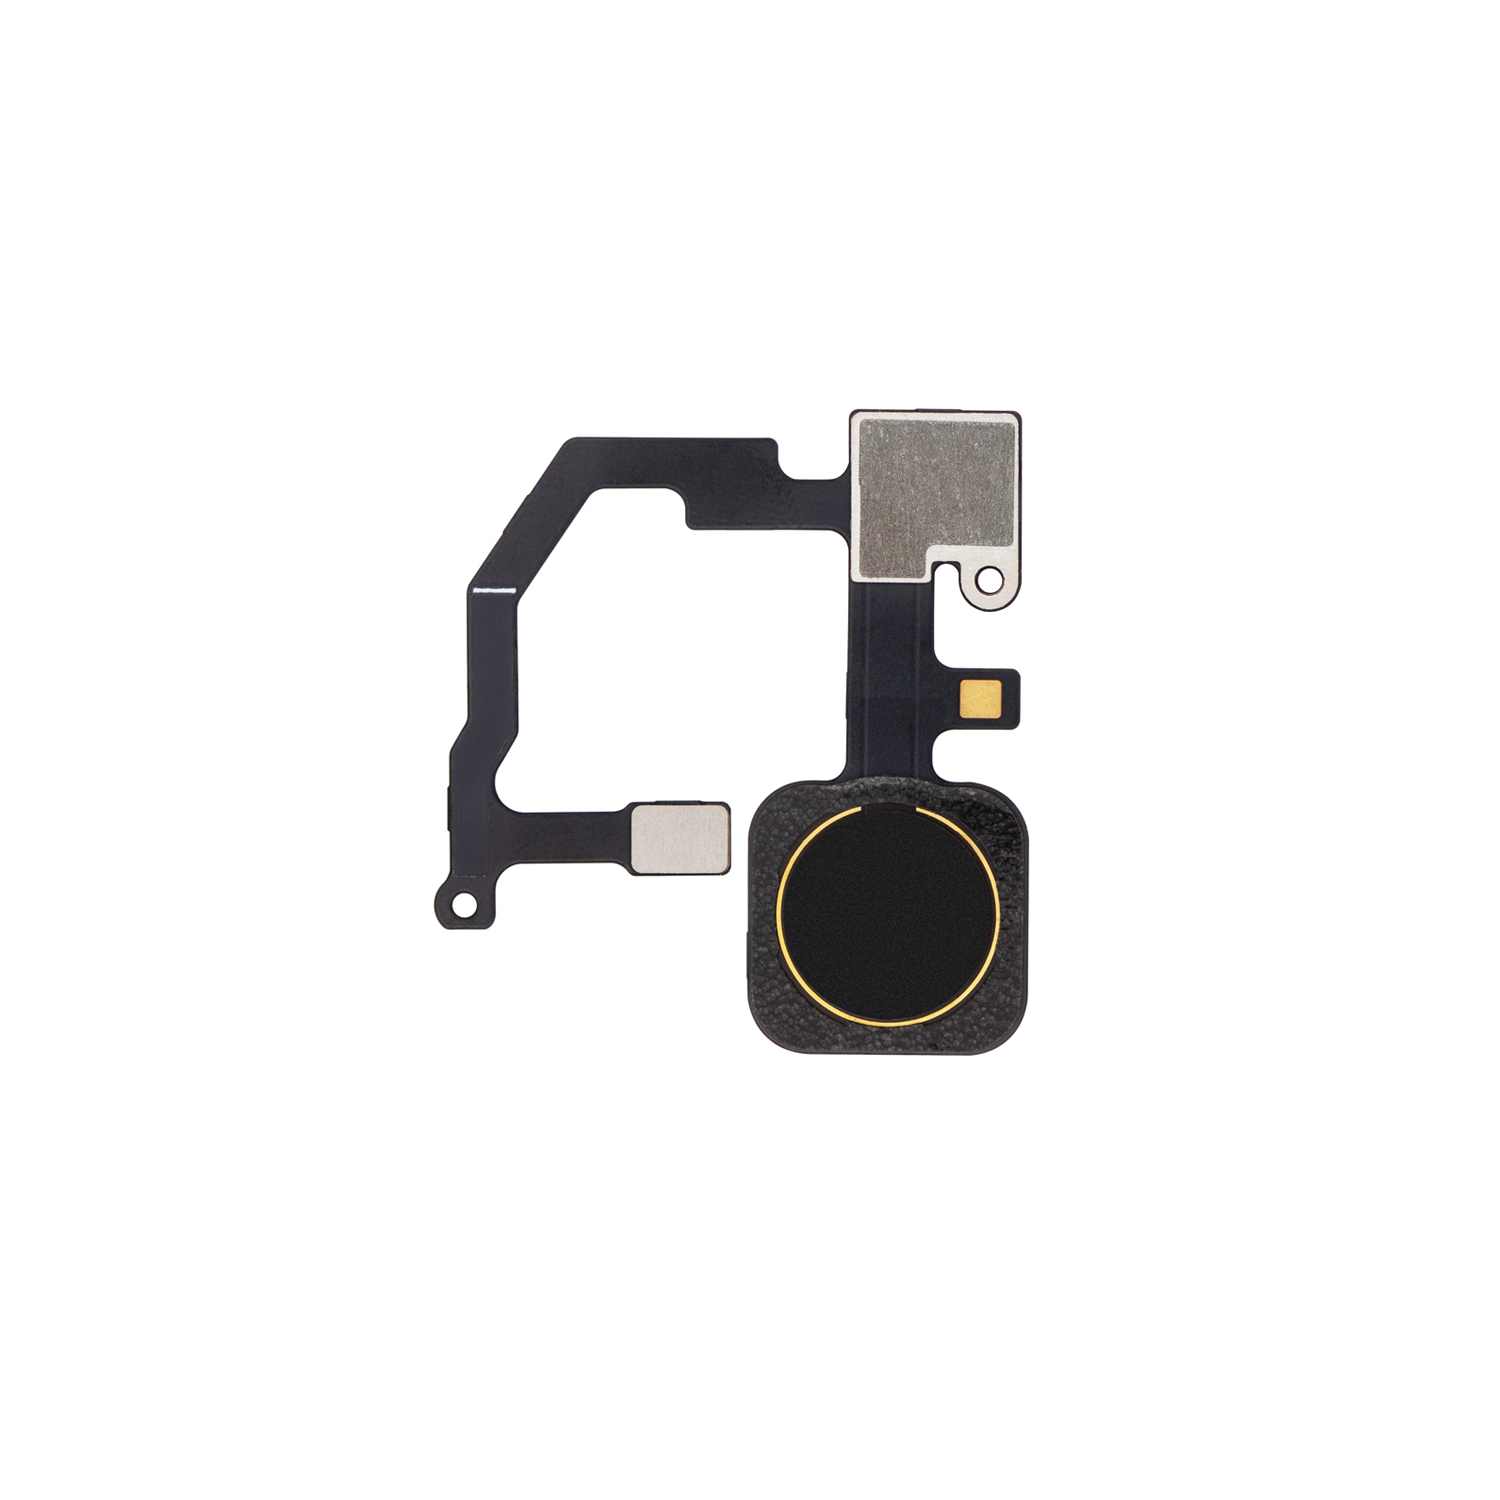 Replacement Fingerprint Scanner With Flex Cable For Google Pixel 5a 5G - Mostly Black